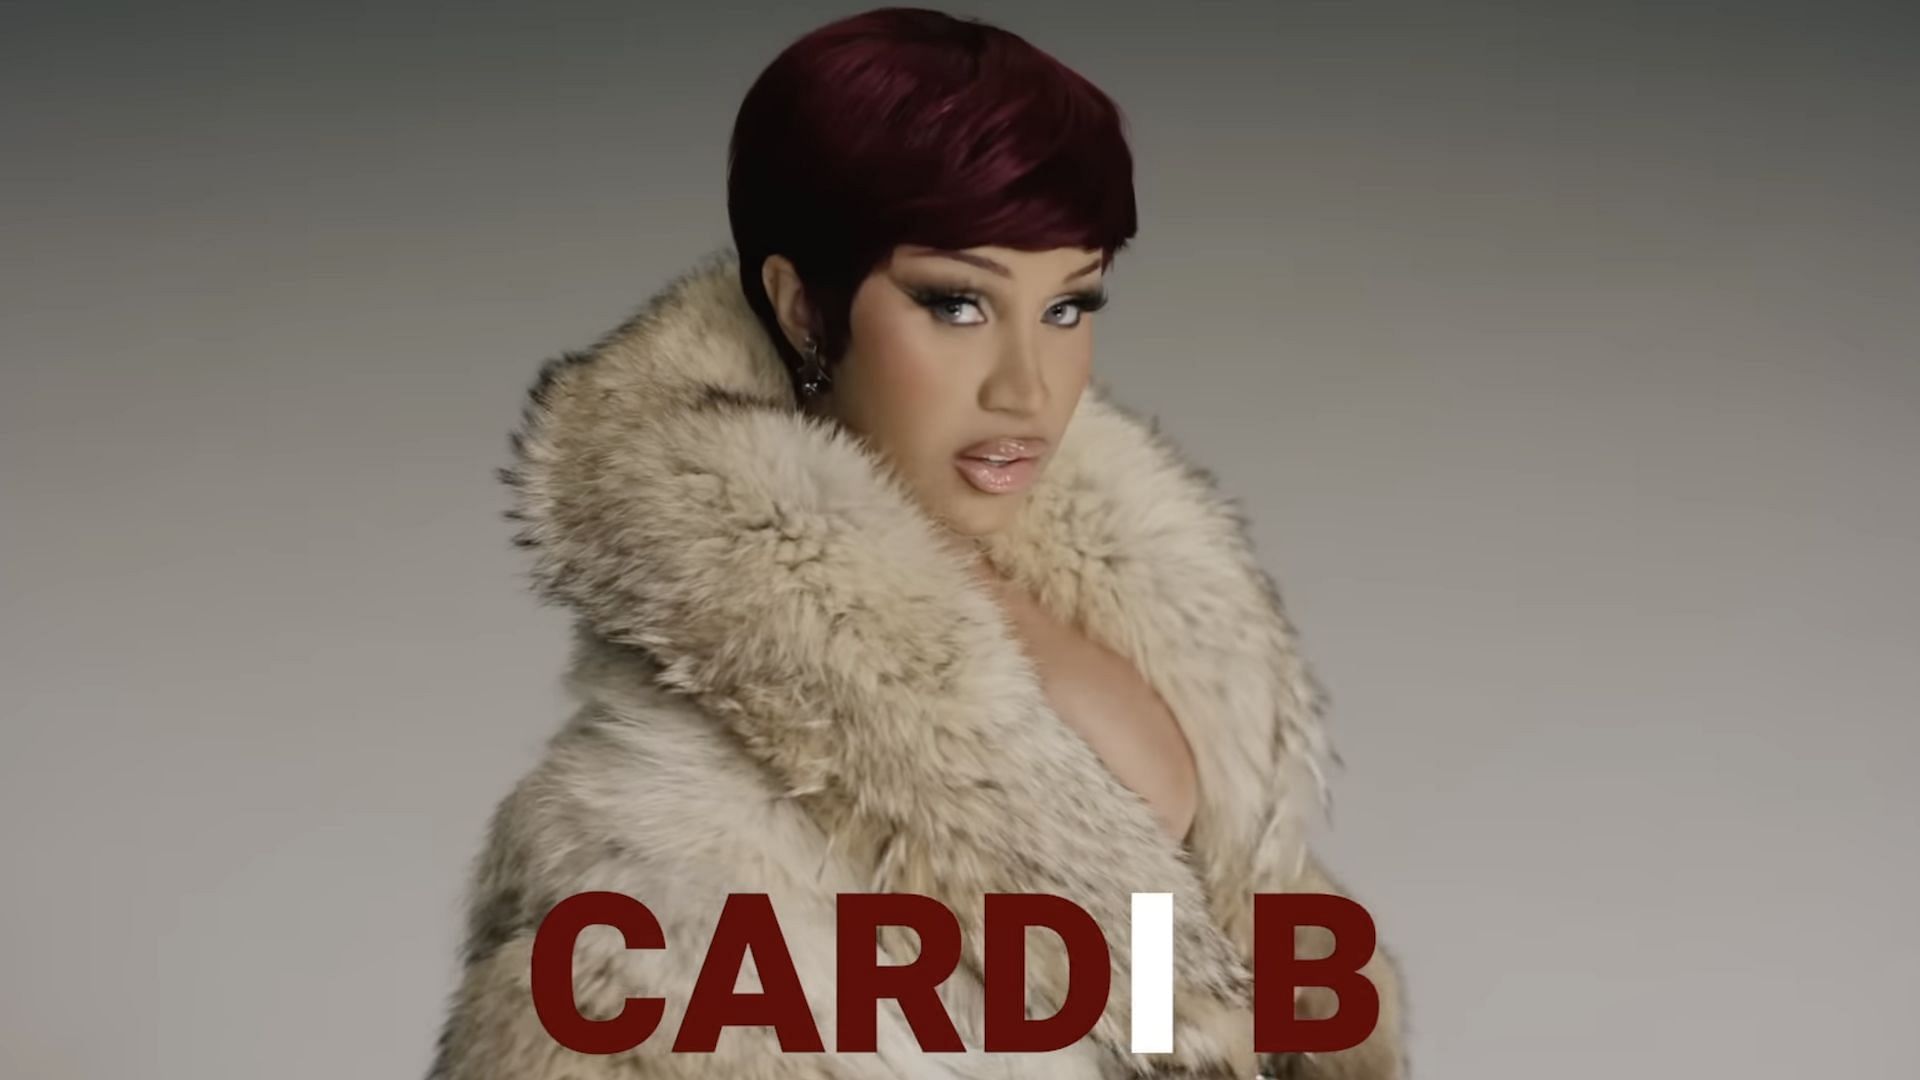 Cardi B performing in the music video for her new single 